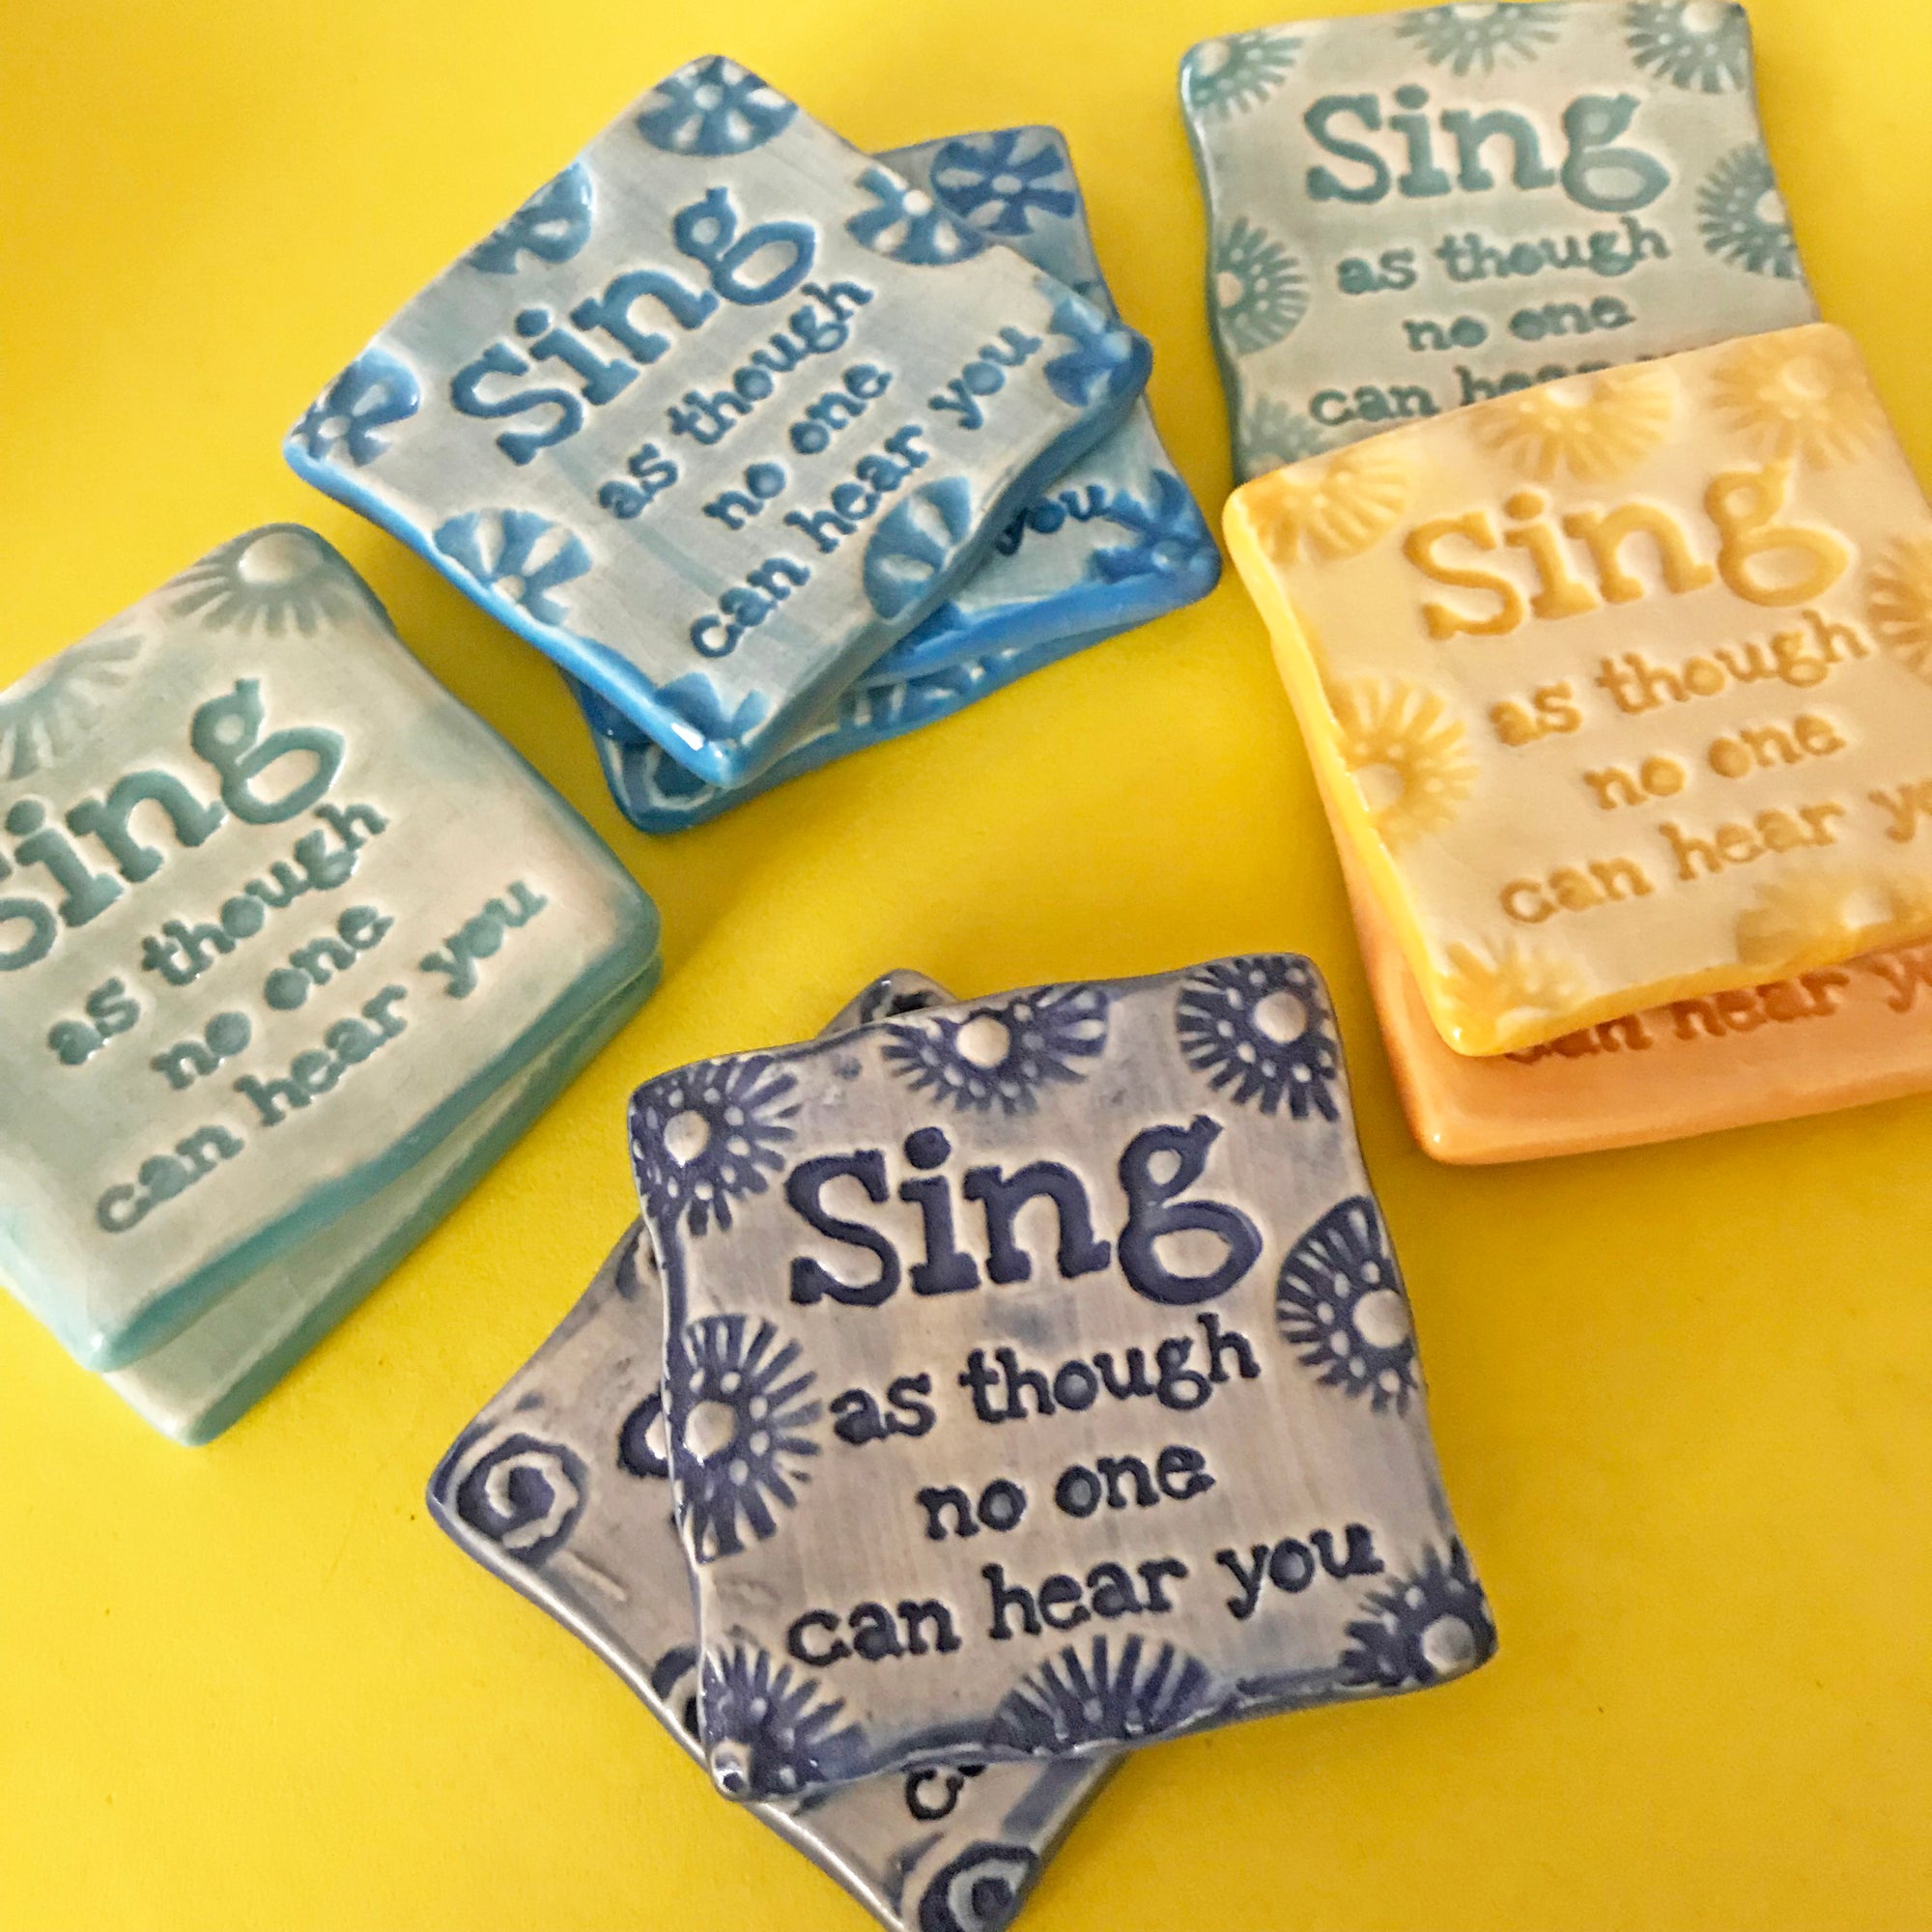 Ceramic magnet with the uplifting phrase "Sing as though no one can hear you".